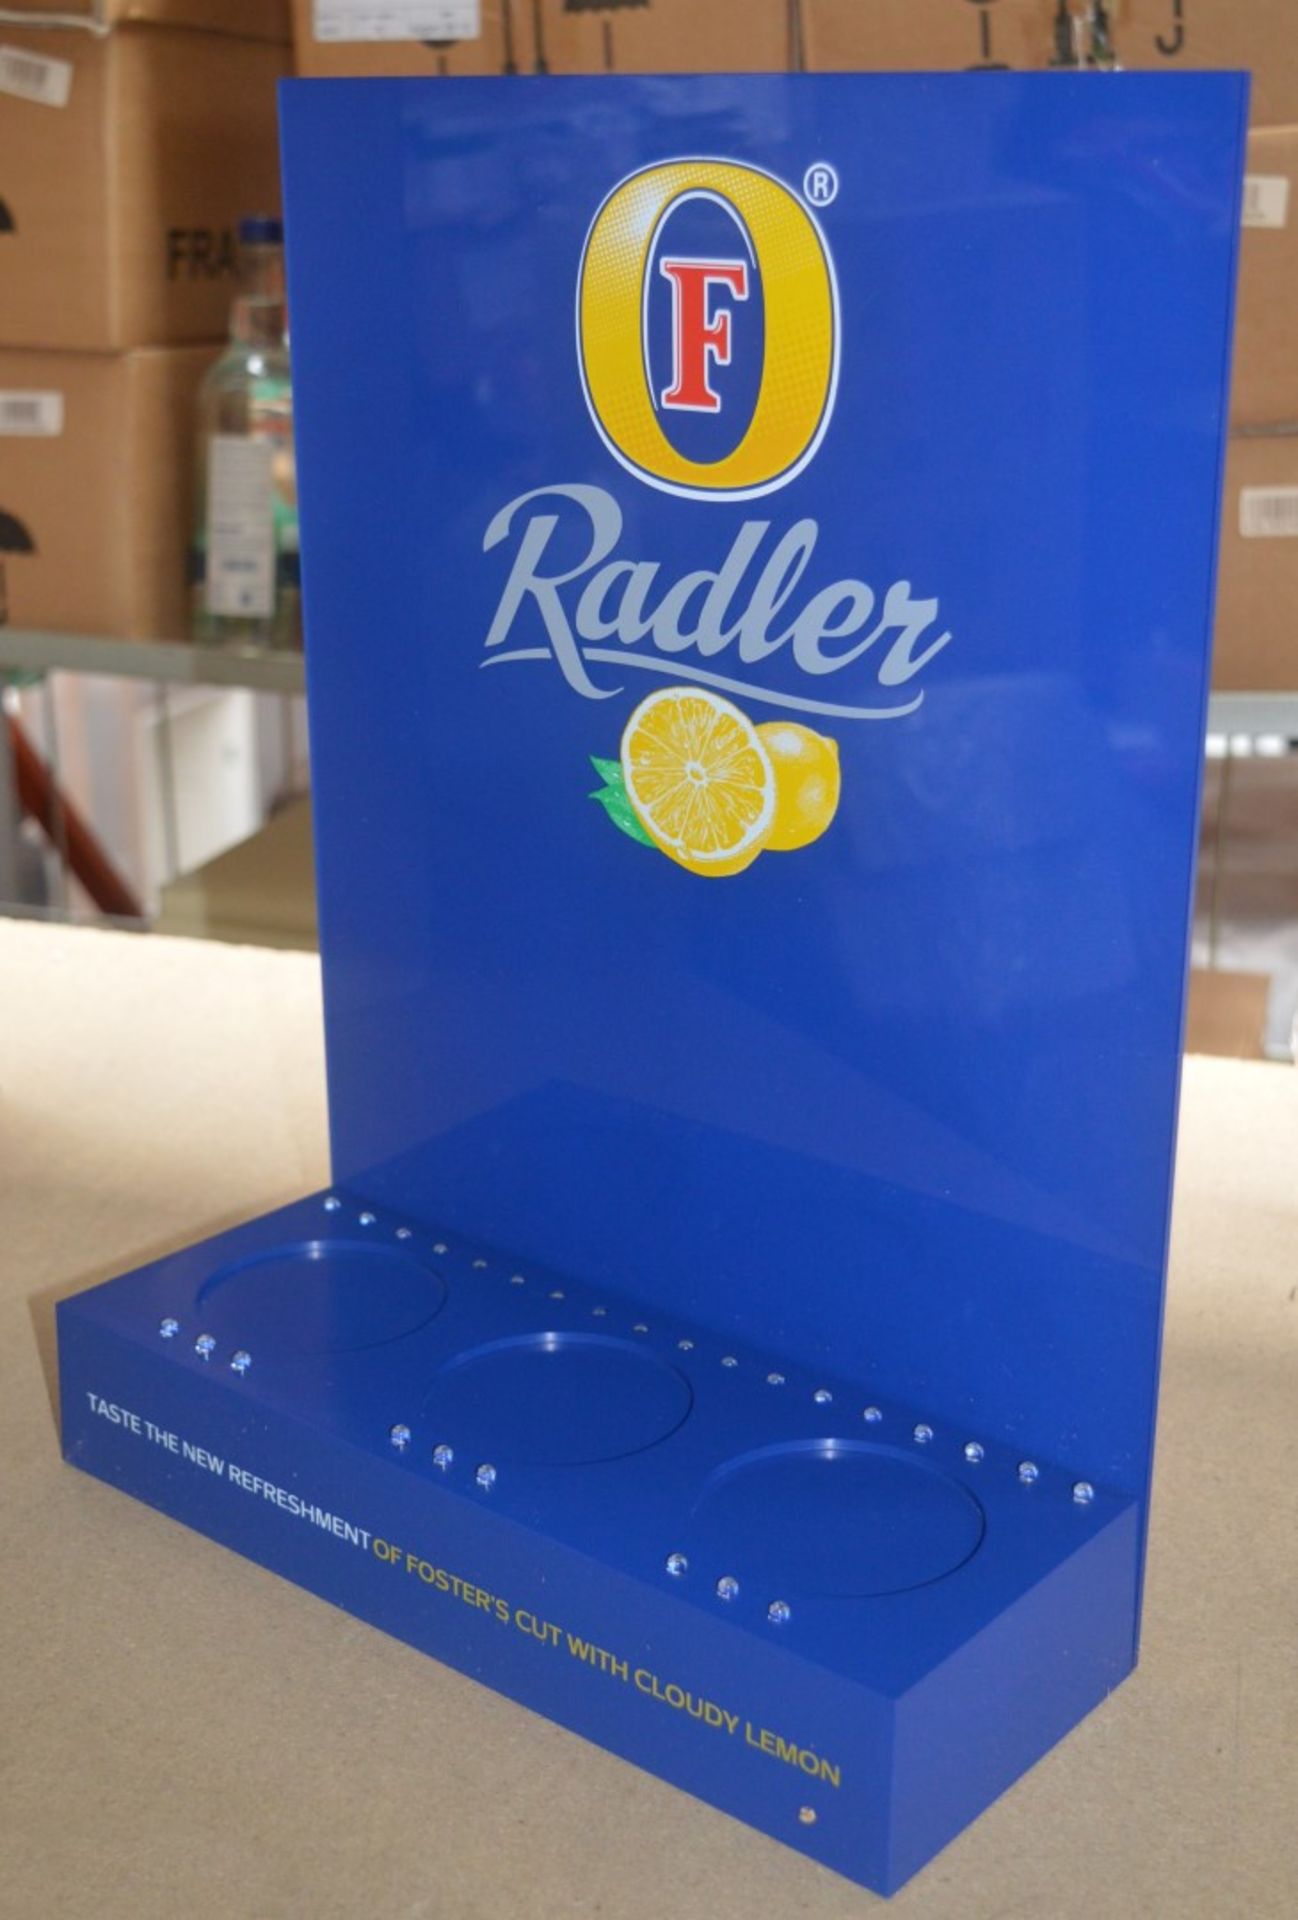 1 x Fosters Radler Illuminated Bottle Glorifier - LED Display Stand For Fosters Drinks Bottles - - Image 6 of 7